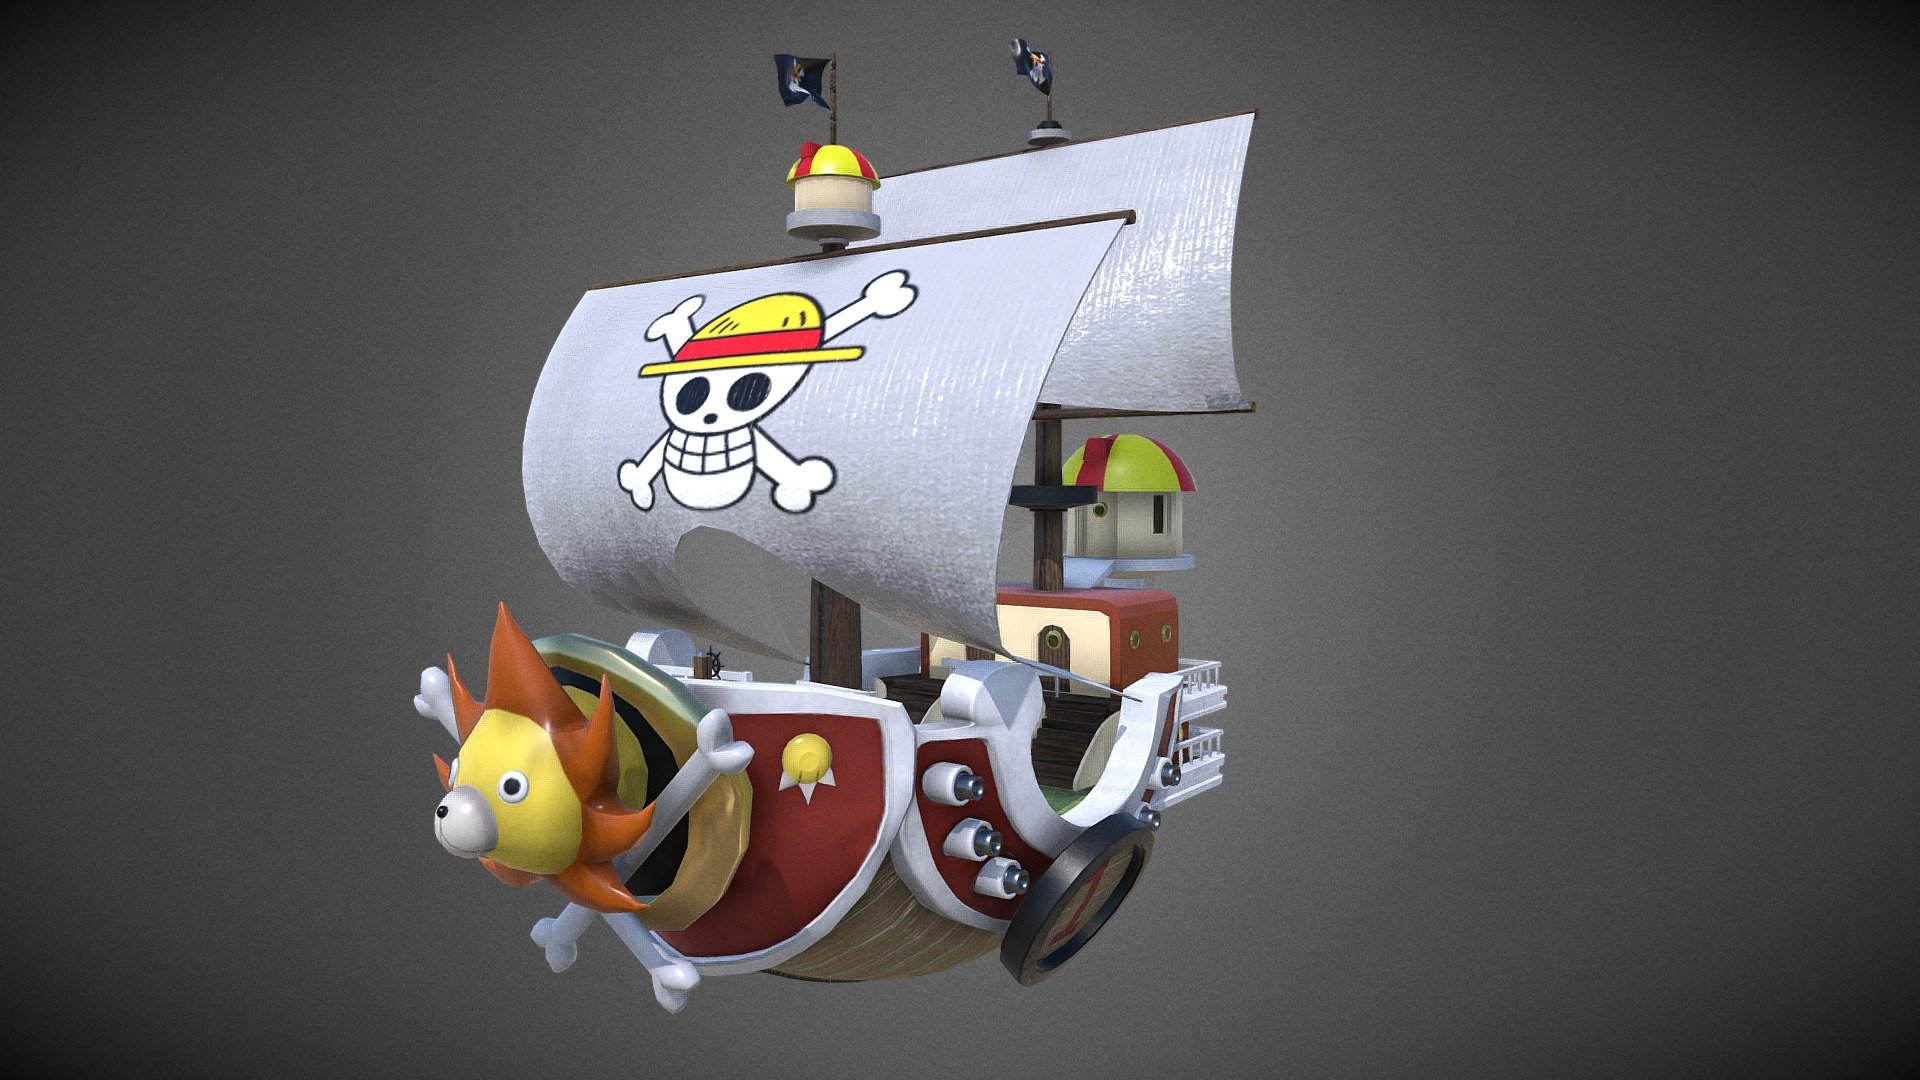 Serie : One Piece

Thousand Sunny is the second ship of the Straw Hat Pirates and, at present, its main means of transport after the Going Merry was left unused. It is a Corvette type vessel that was created with the designs, the skills and the work of Franky, with some help from Yokozuna and Iceburg, the rest of the foremen of the Galley-La Company and the members of the Franky Family. Built from wood from the Adam Tree, the Thousand Sunny is a magnificent ship, and at least twice as large as the Going Merry.

Modeling and mapping in 3ds Max, texturing in Substance Painter 3d model